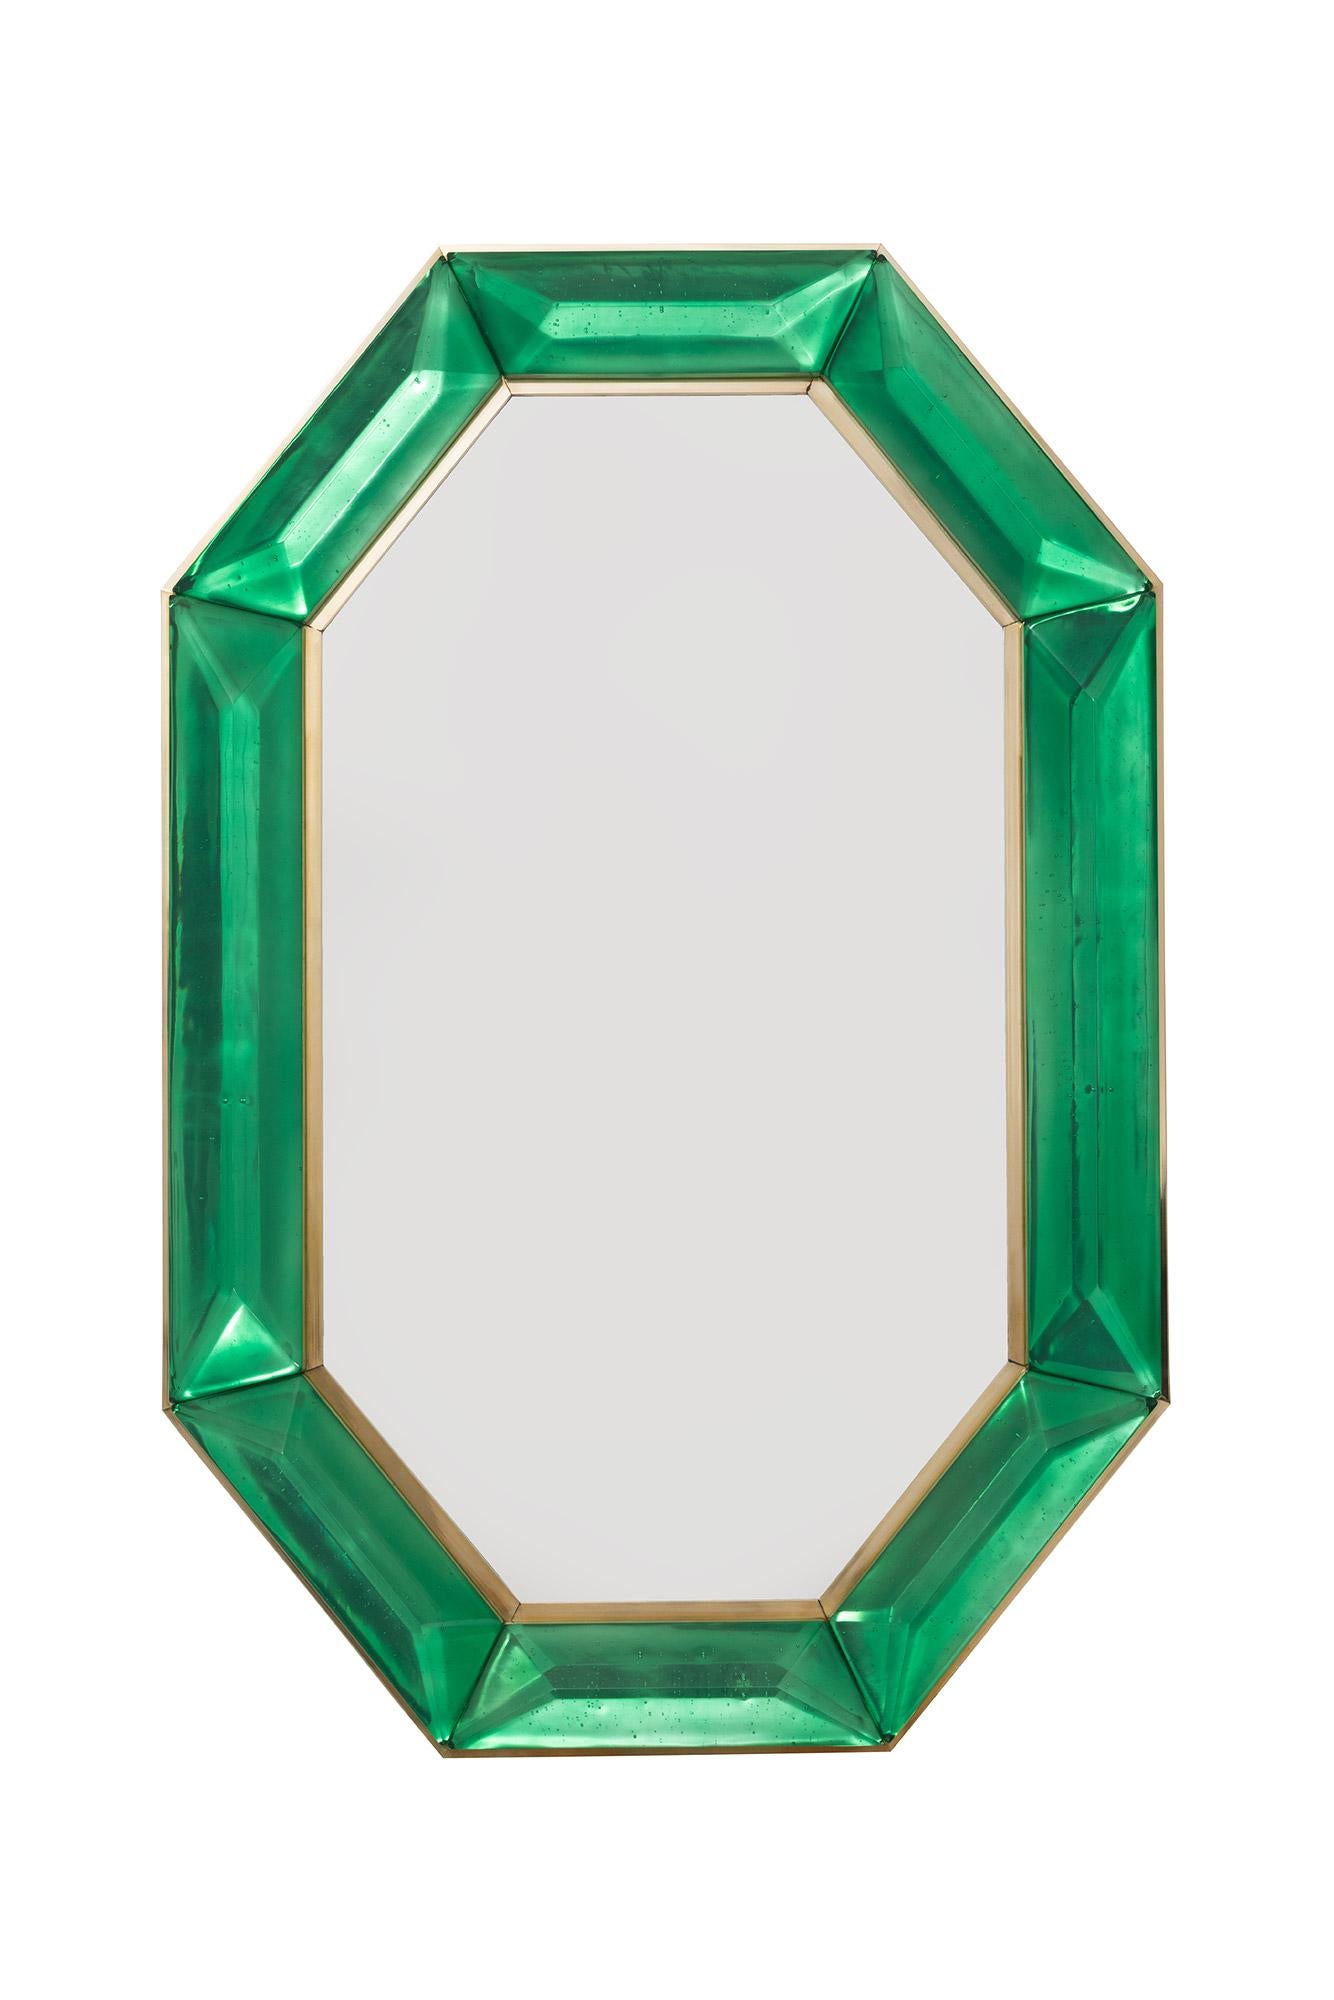 Pair of Bespoke octagon emerald green Murano glass mirrors, in stock
 Vivid and intense emerald green glass block with naturally occurring air inclusions throughout 
 Highly polished faceted pattern
 Brass gallery all around
 Each mirror is a unique